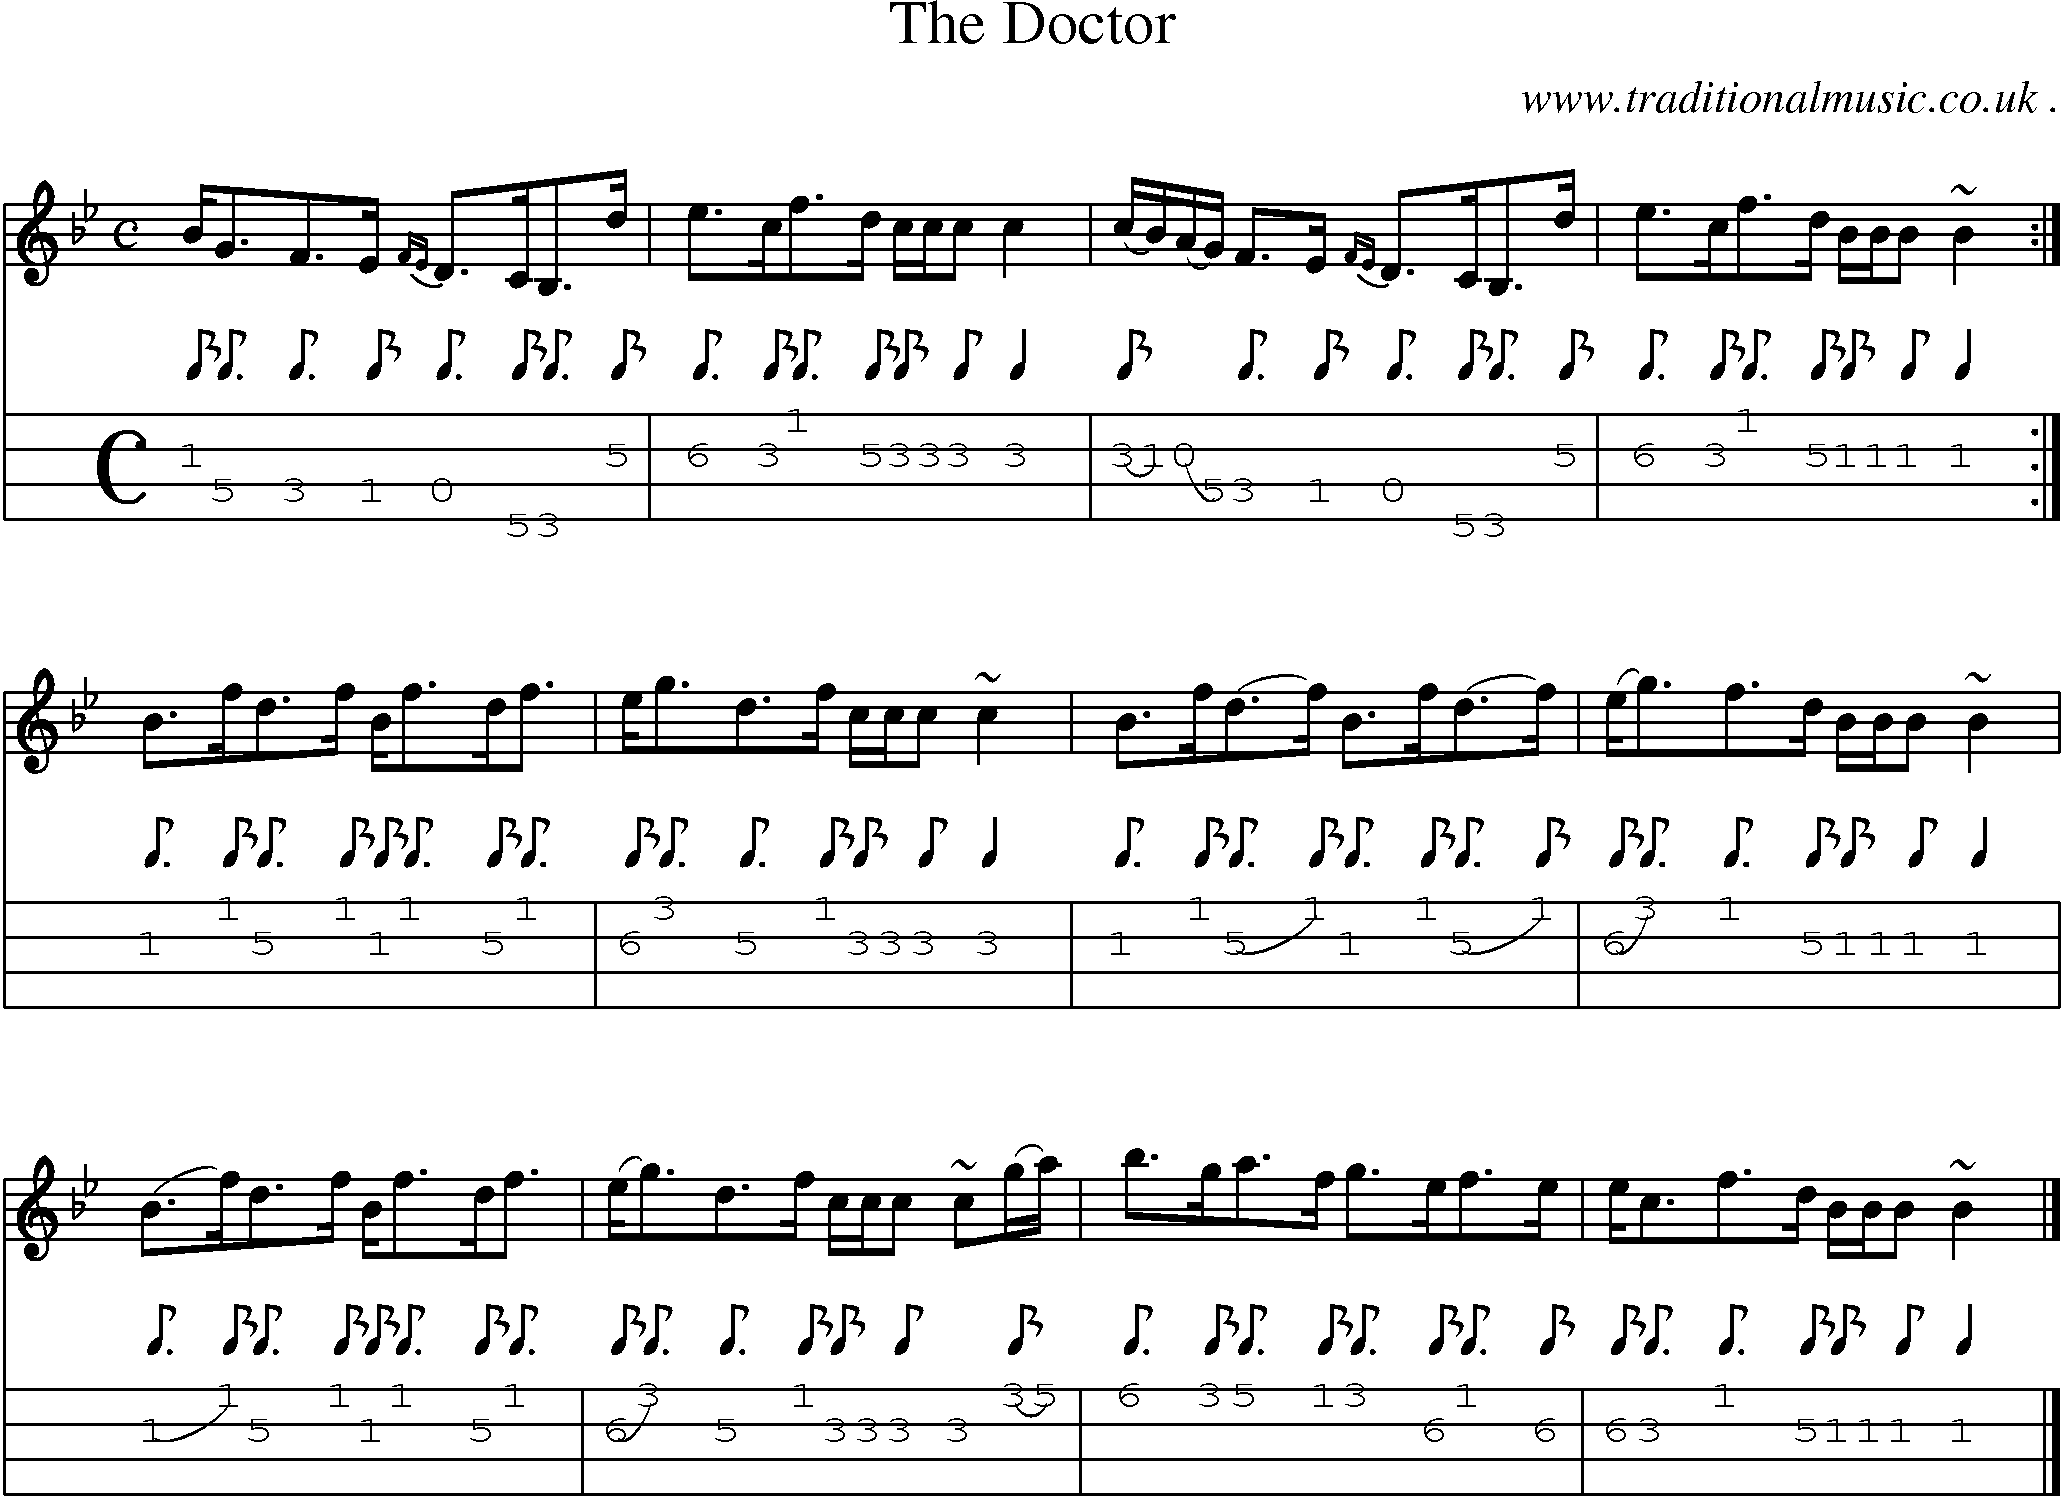 Sheet-music  score, Chords and Mandolin Tabs for The Doctor